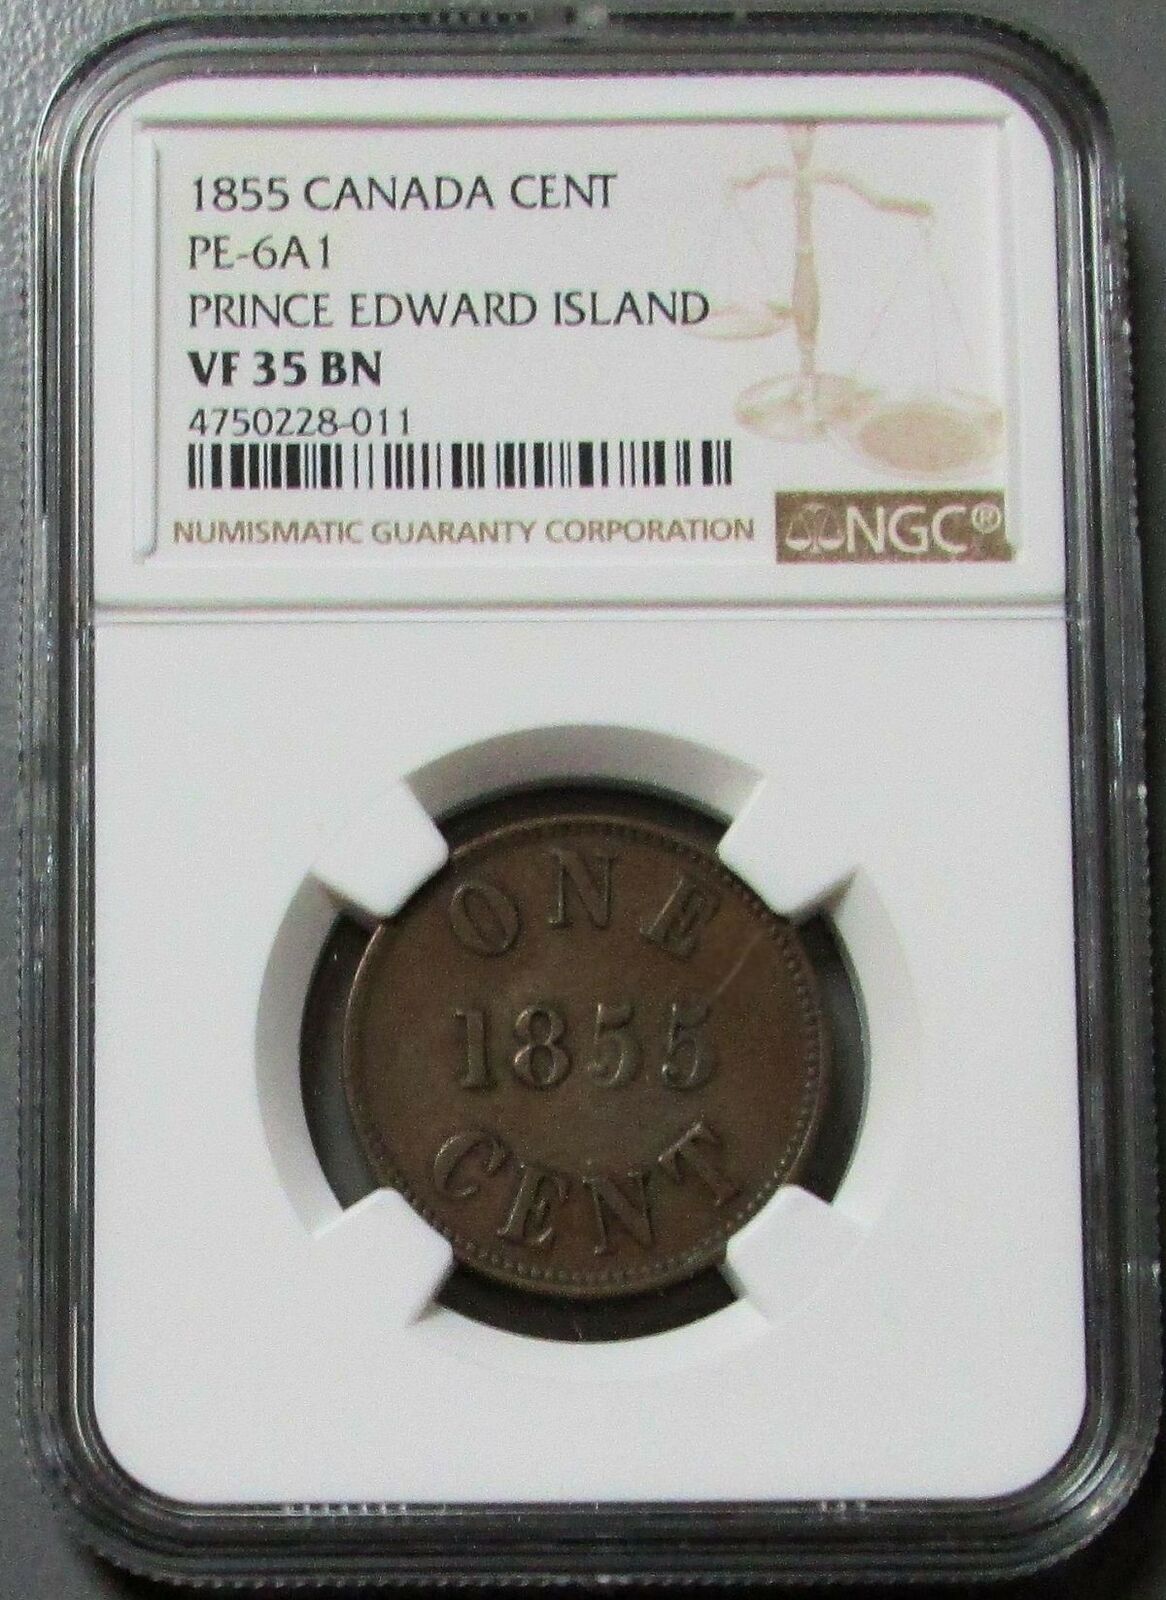 1855 CANADA ONE CENT PRINCE EDWARD ISLAND FISHERIES NGC VERY FINE 35 BN PE-6A1